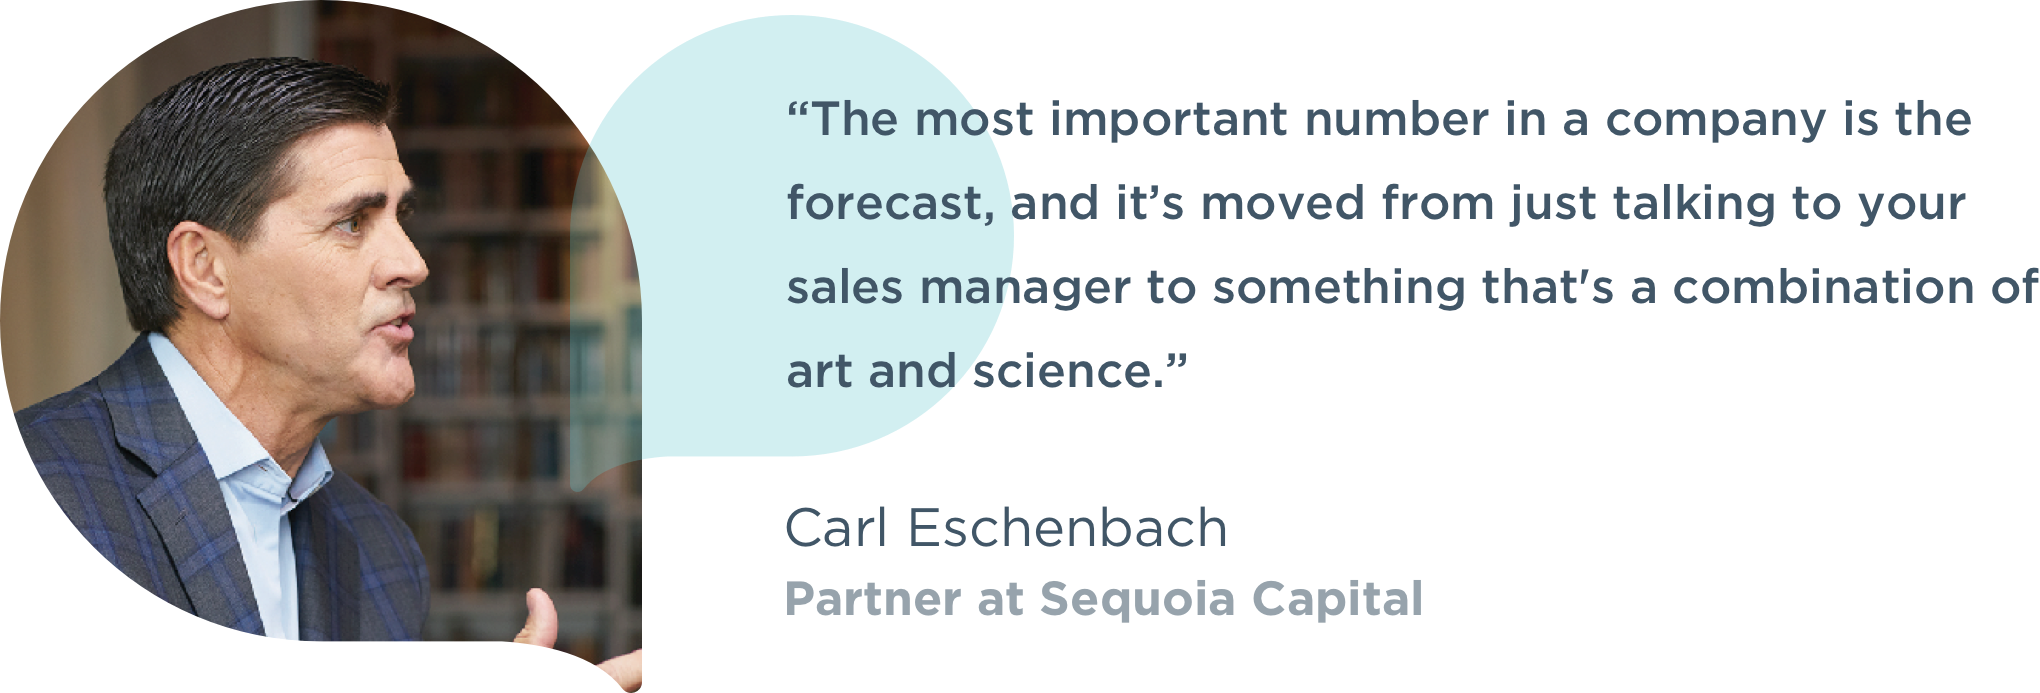 Image with quote and headshot photograph of Carl Eschenbach, Partner at Sequoia Capital